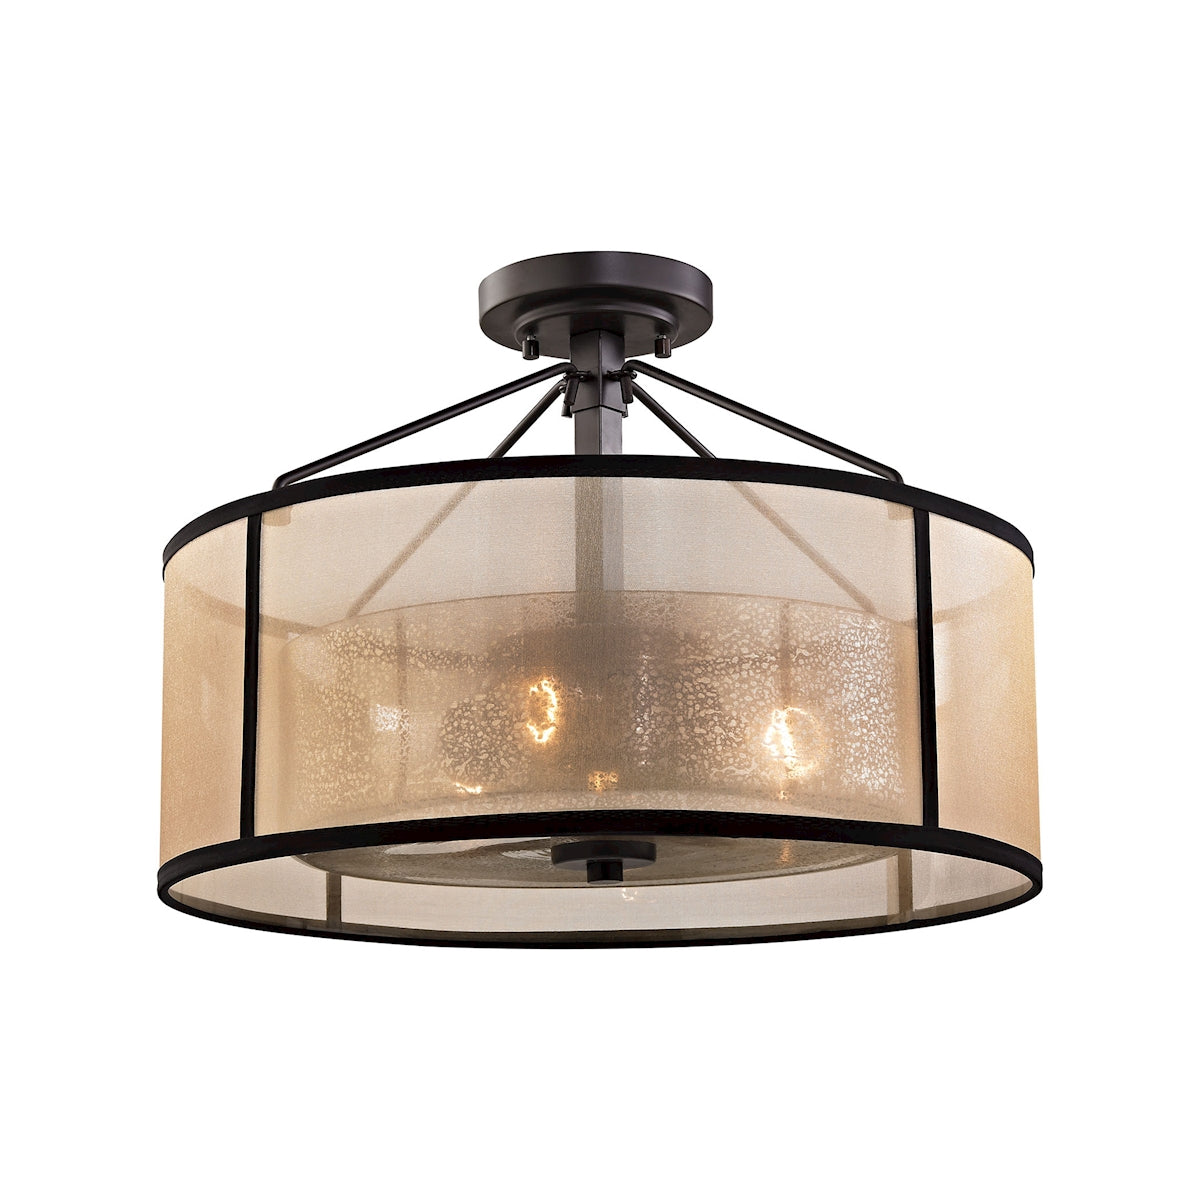 ELK Lighting 57024/3 - Diffusion 18" Wide 3-Light Semi Flush in Oiled Bronze with Organza and Mercur